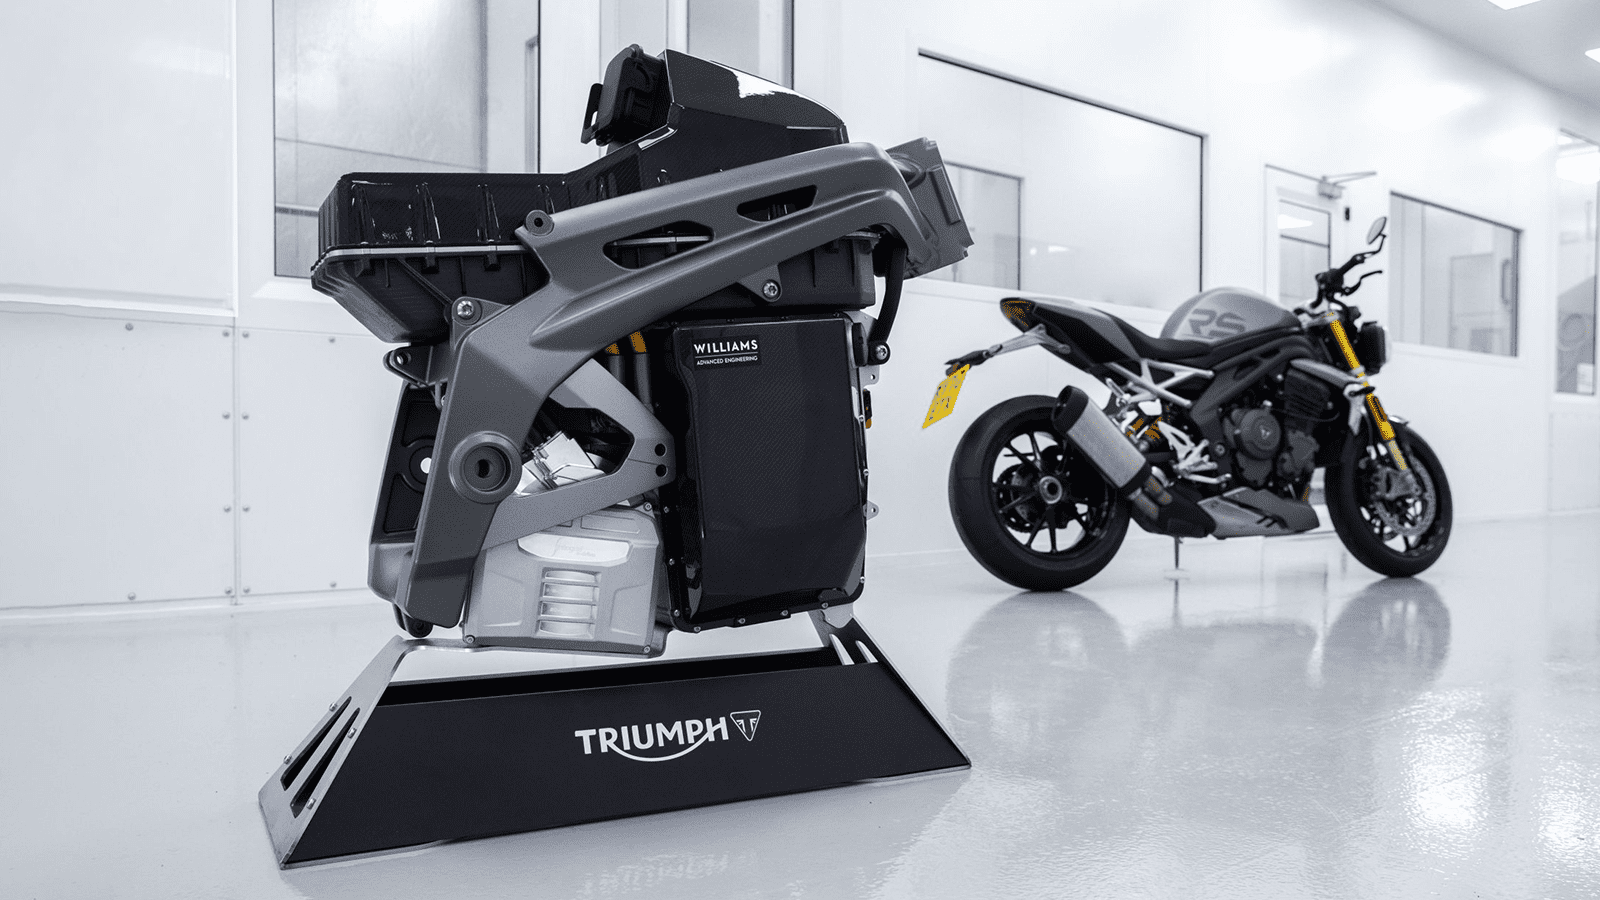 TE-1 WINS ELECTRIC MOTORCYCLE OF THE YEAR